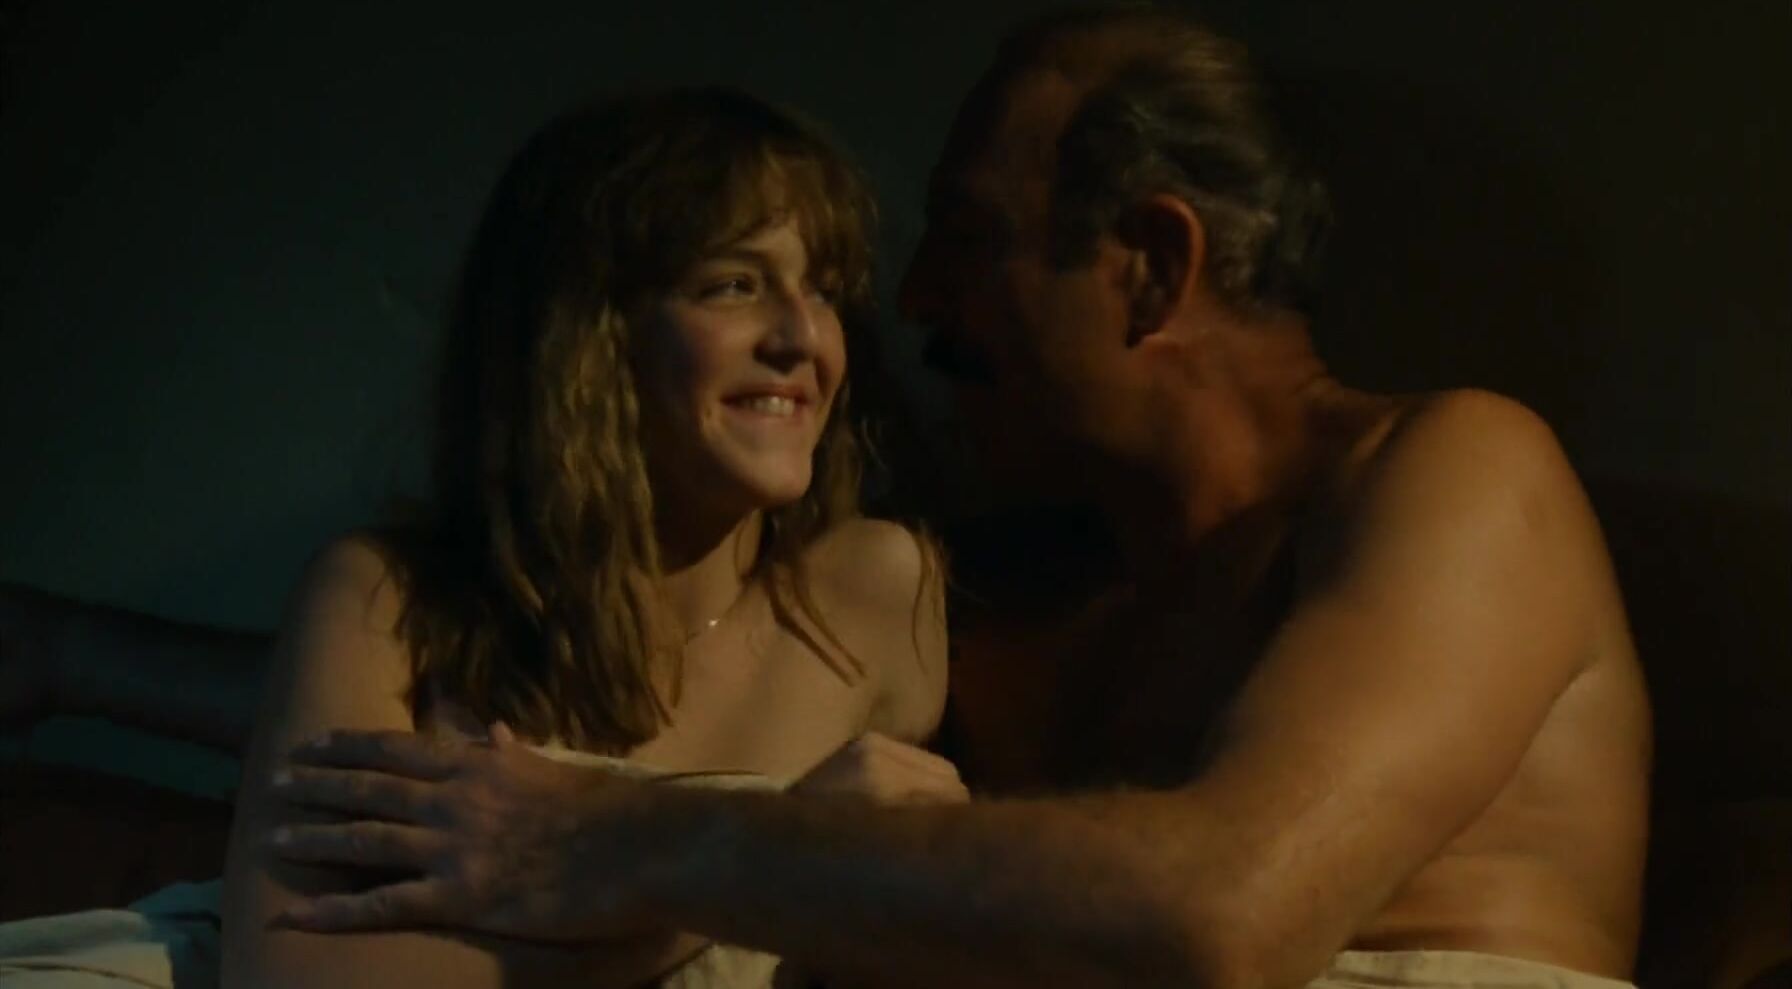 Hardcore Porn Old guy falls in love with younger Agnes Soral in One Wild Moment sex scene (1977) ComptonBooty